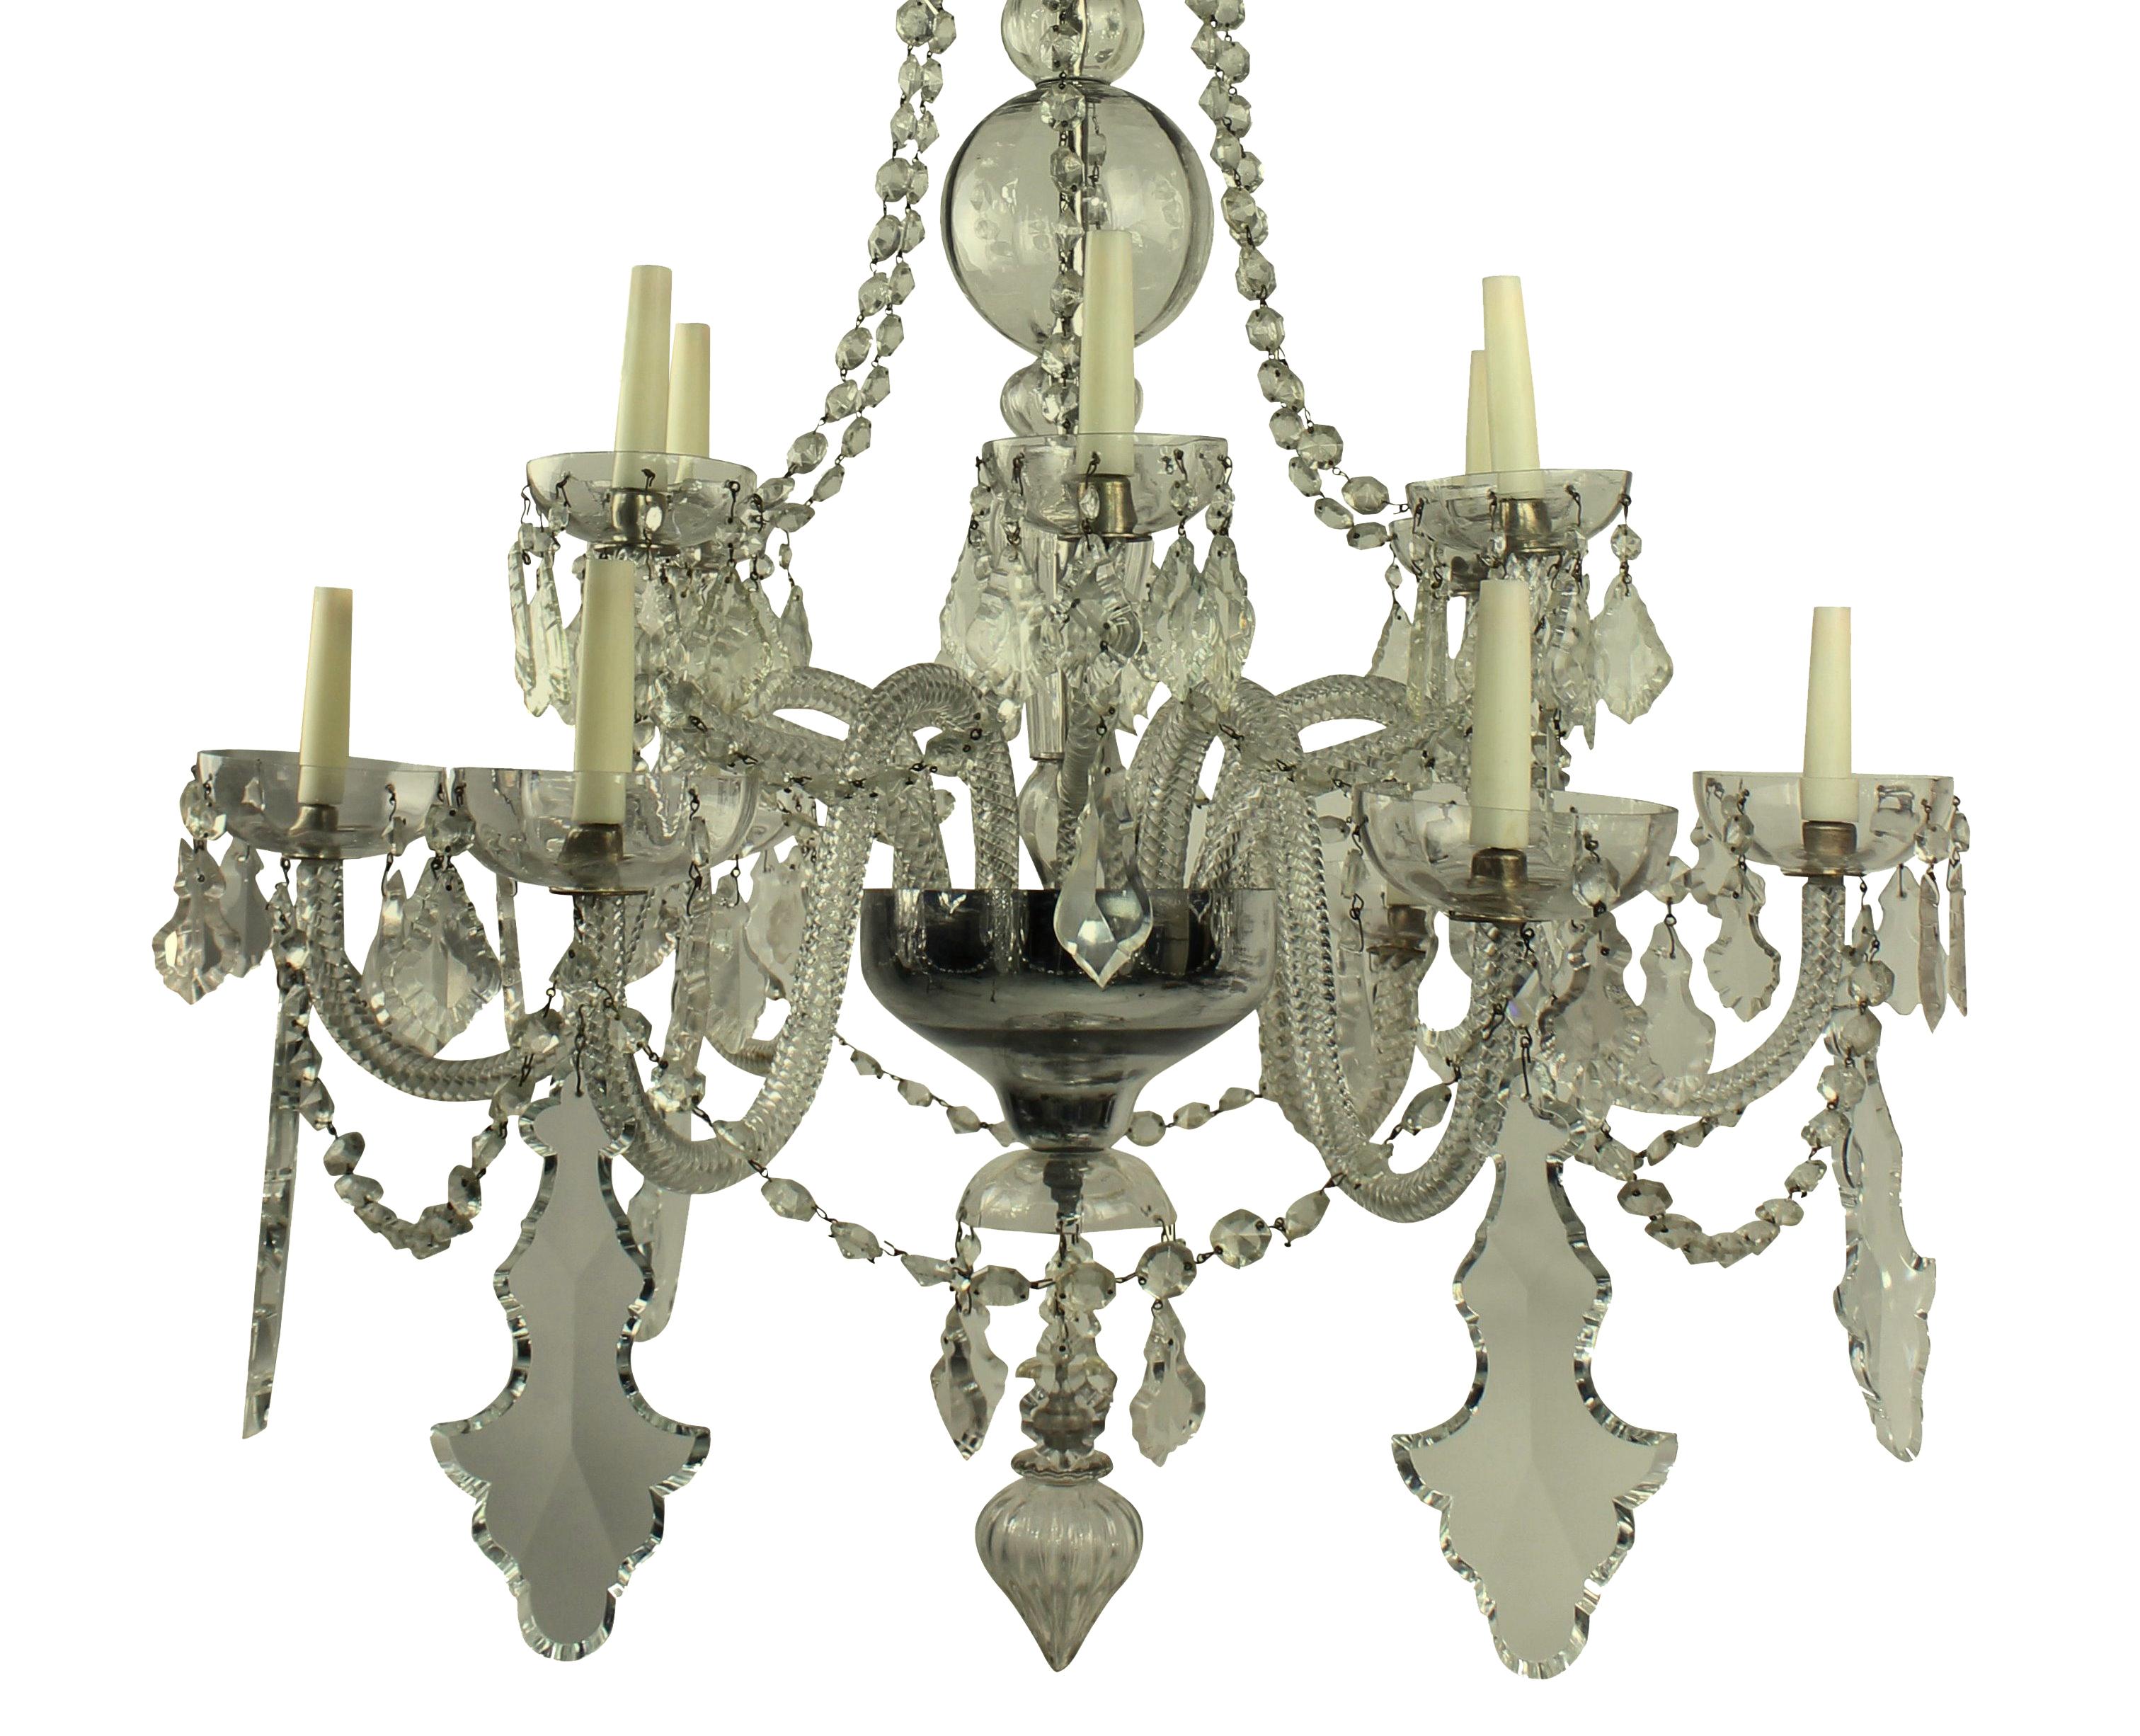 A fine French cut glass chandelier of good proportions, hung throughout with plaques and swags.